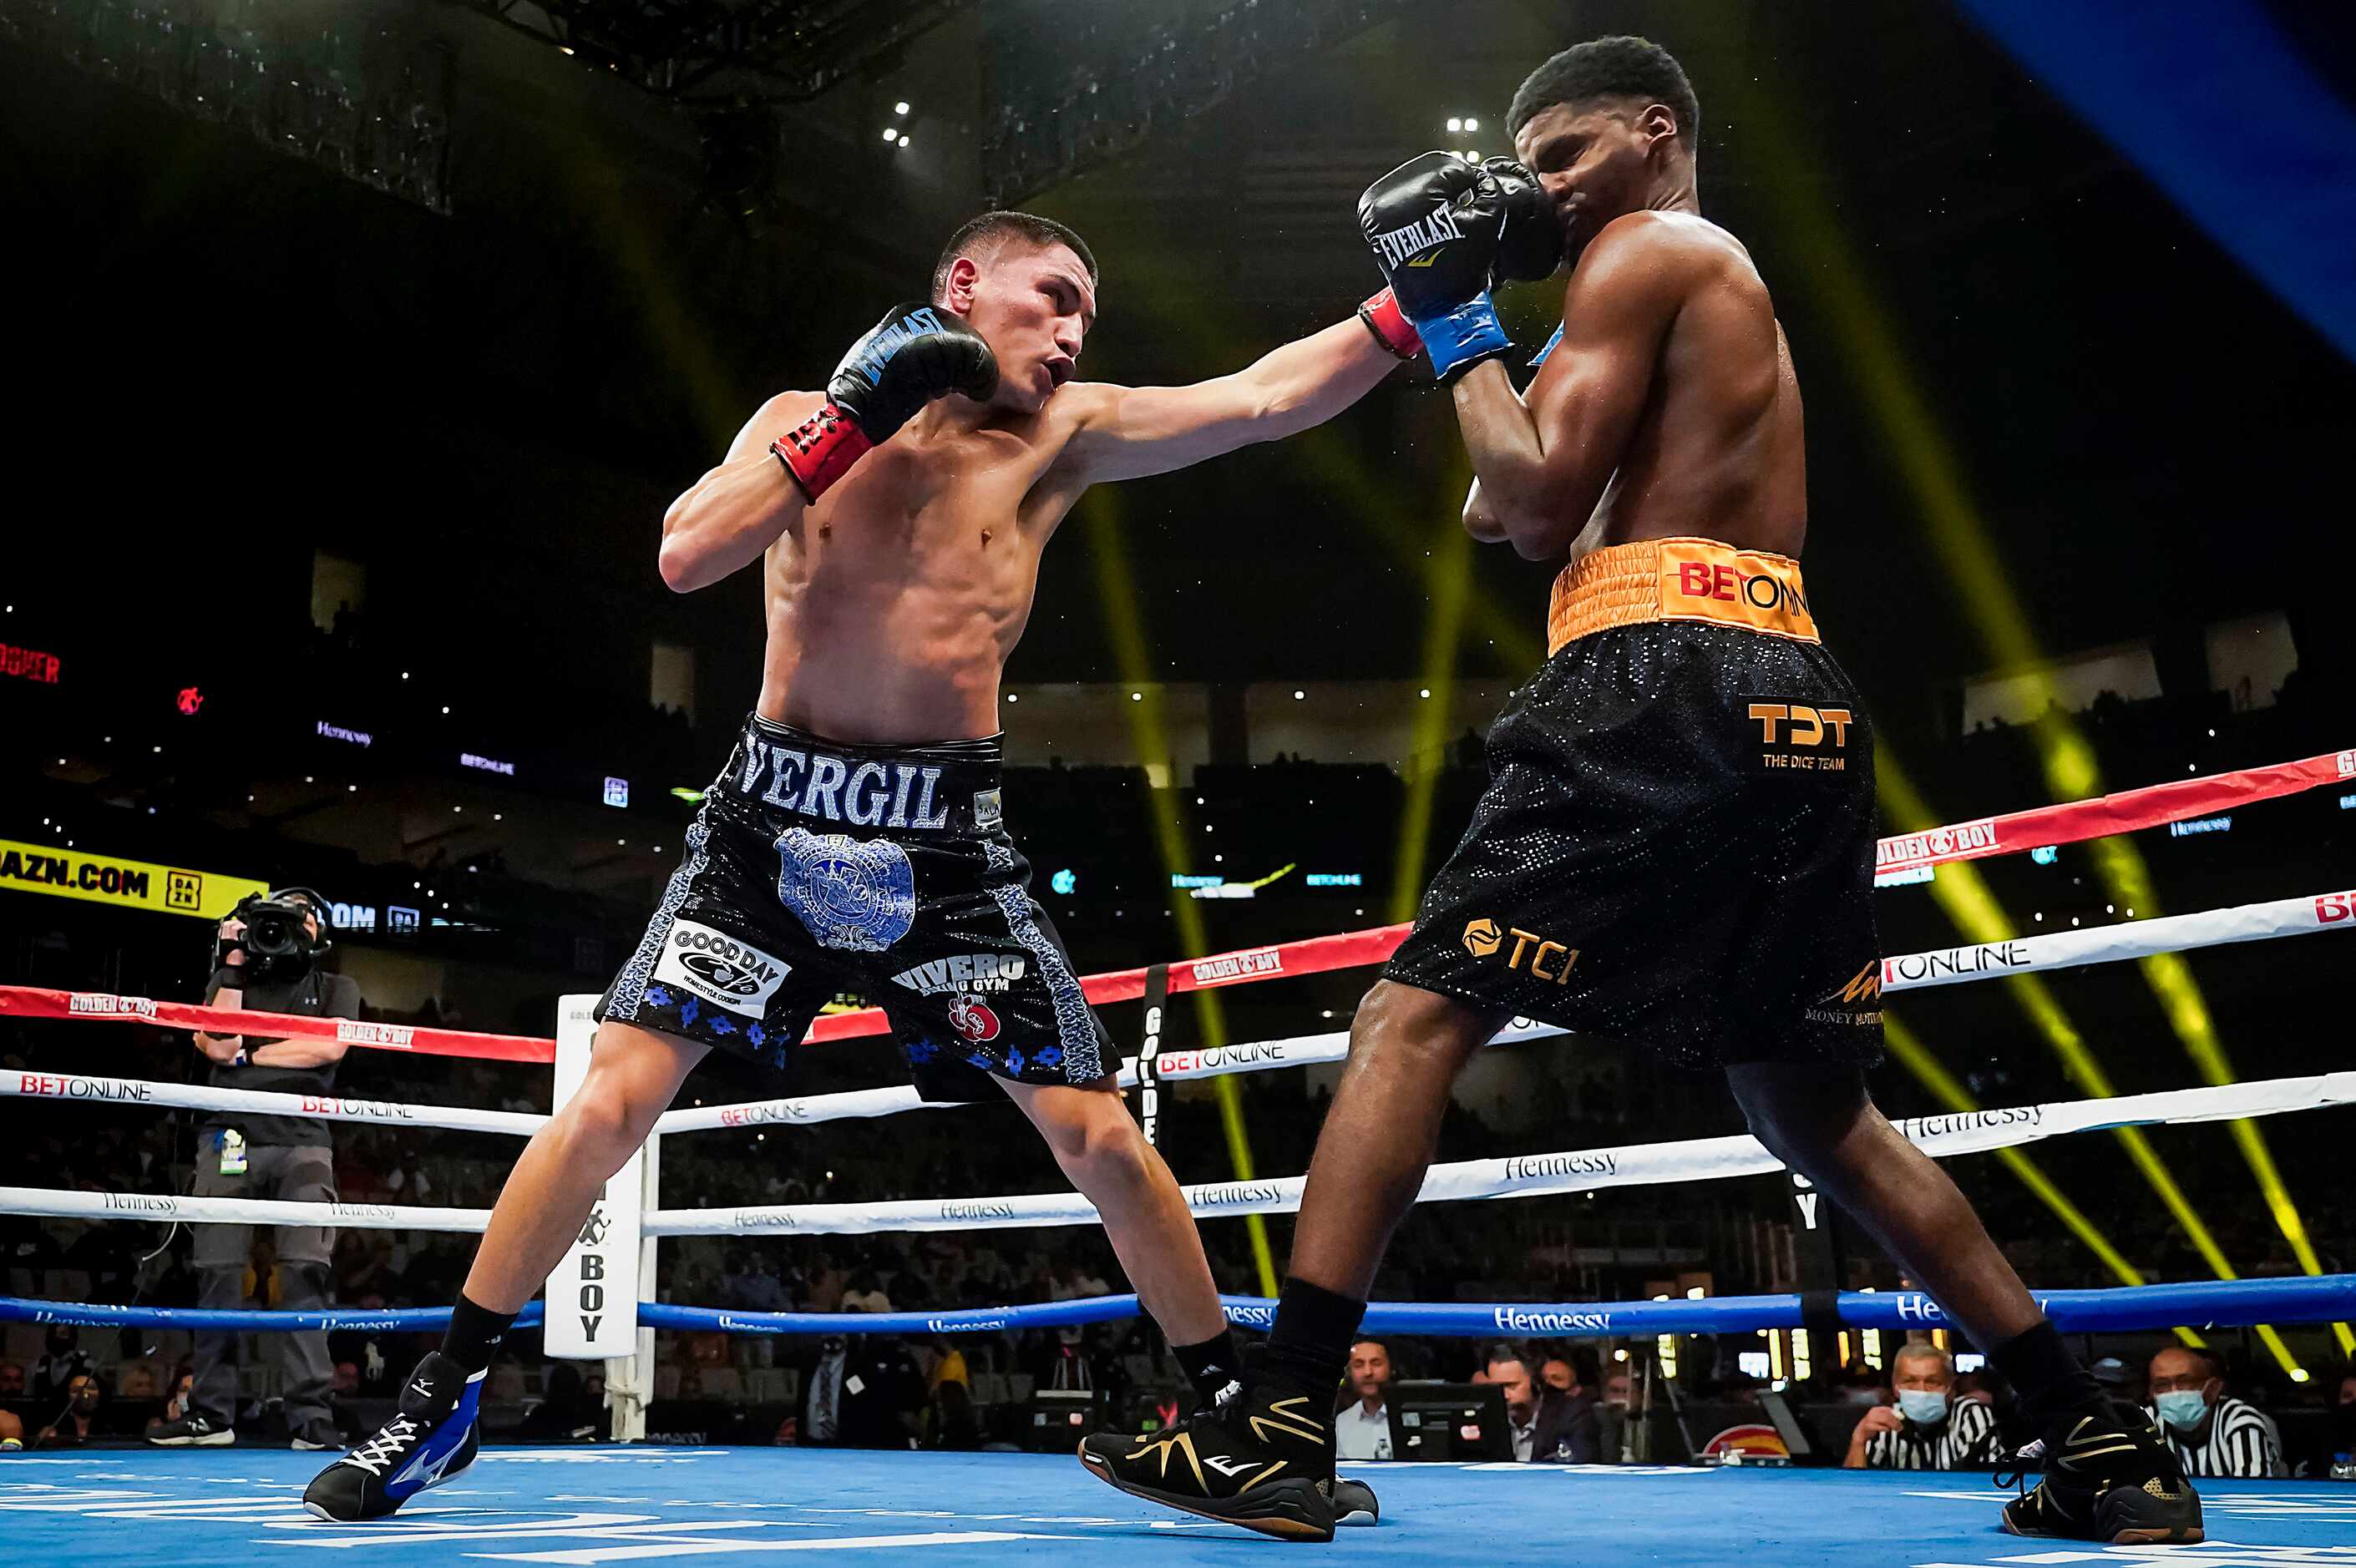 Vergil Ortiz Jr. (left) lands a punch to the face of Maurice Hooker as they fight for the...